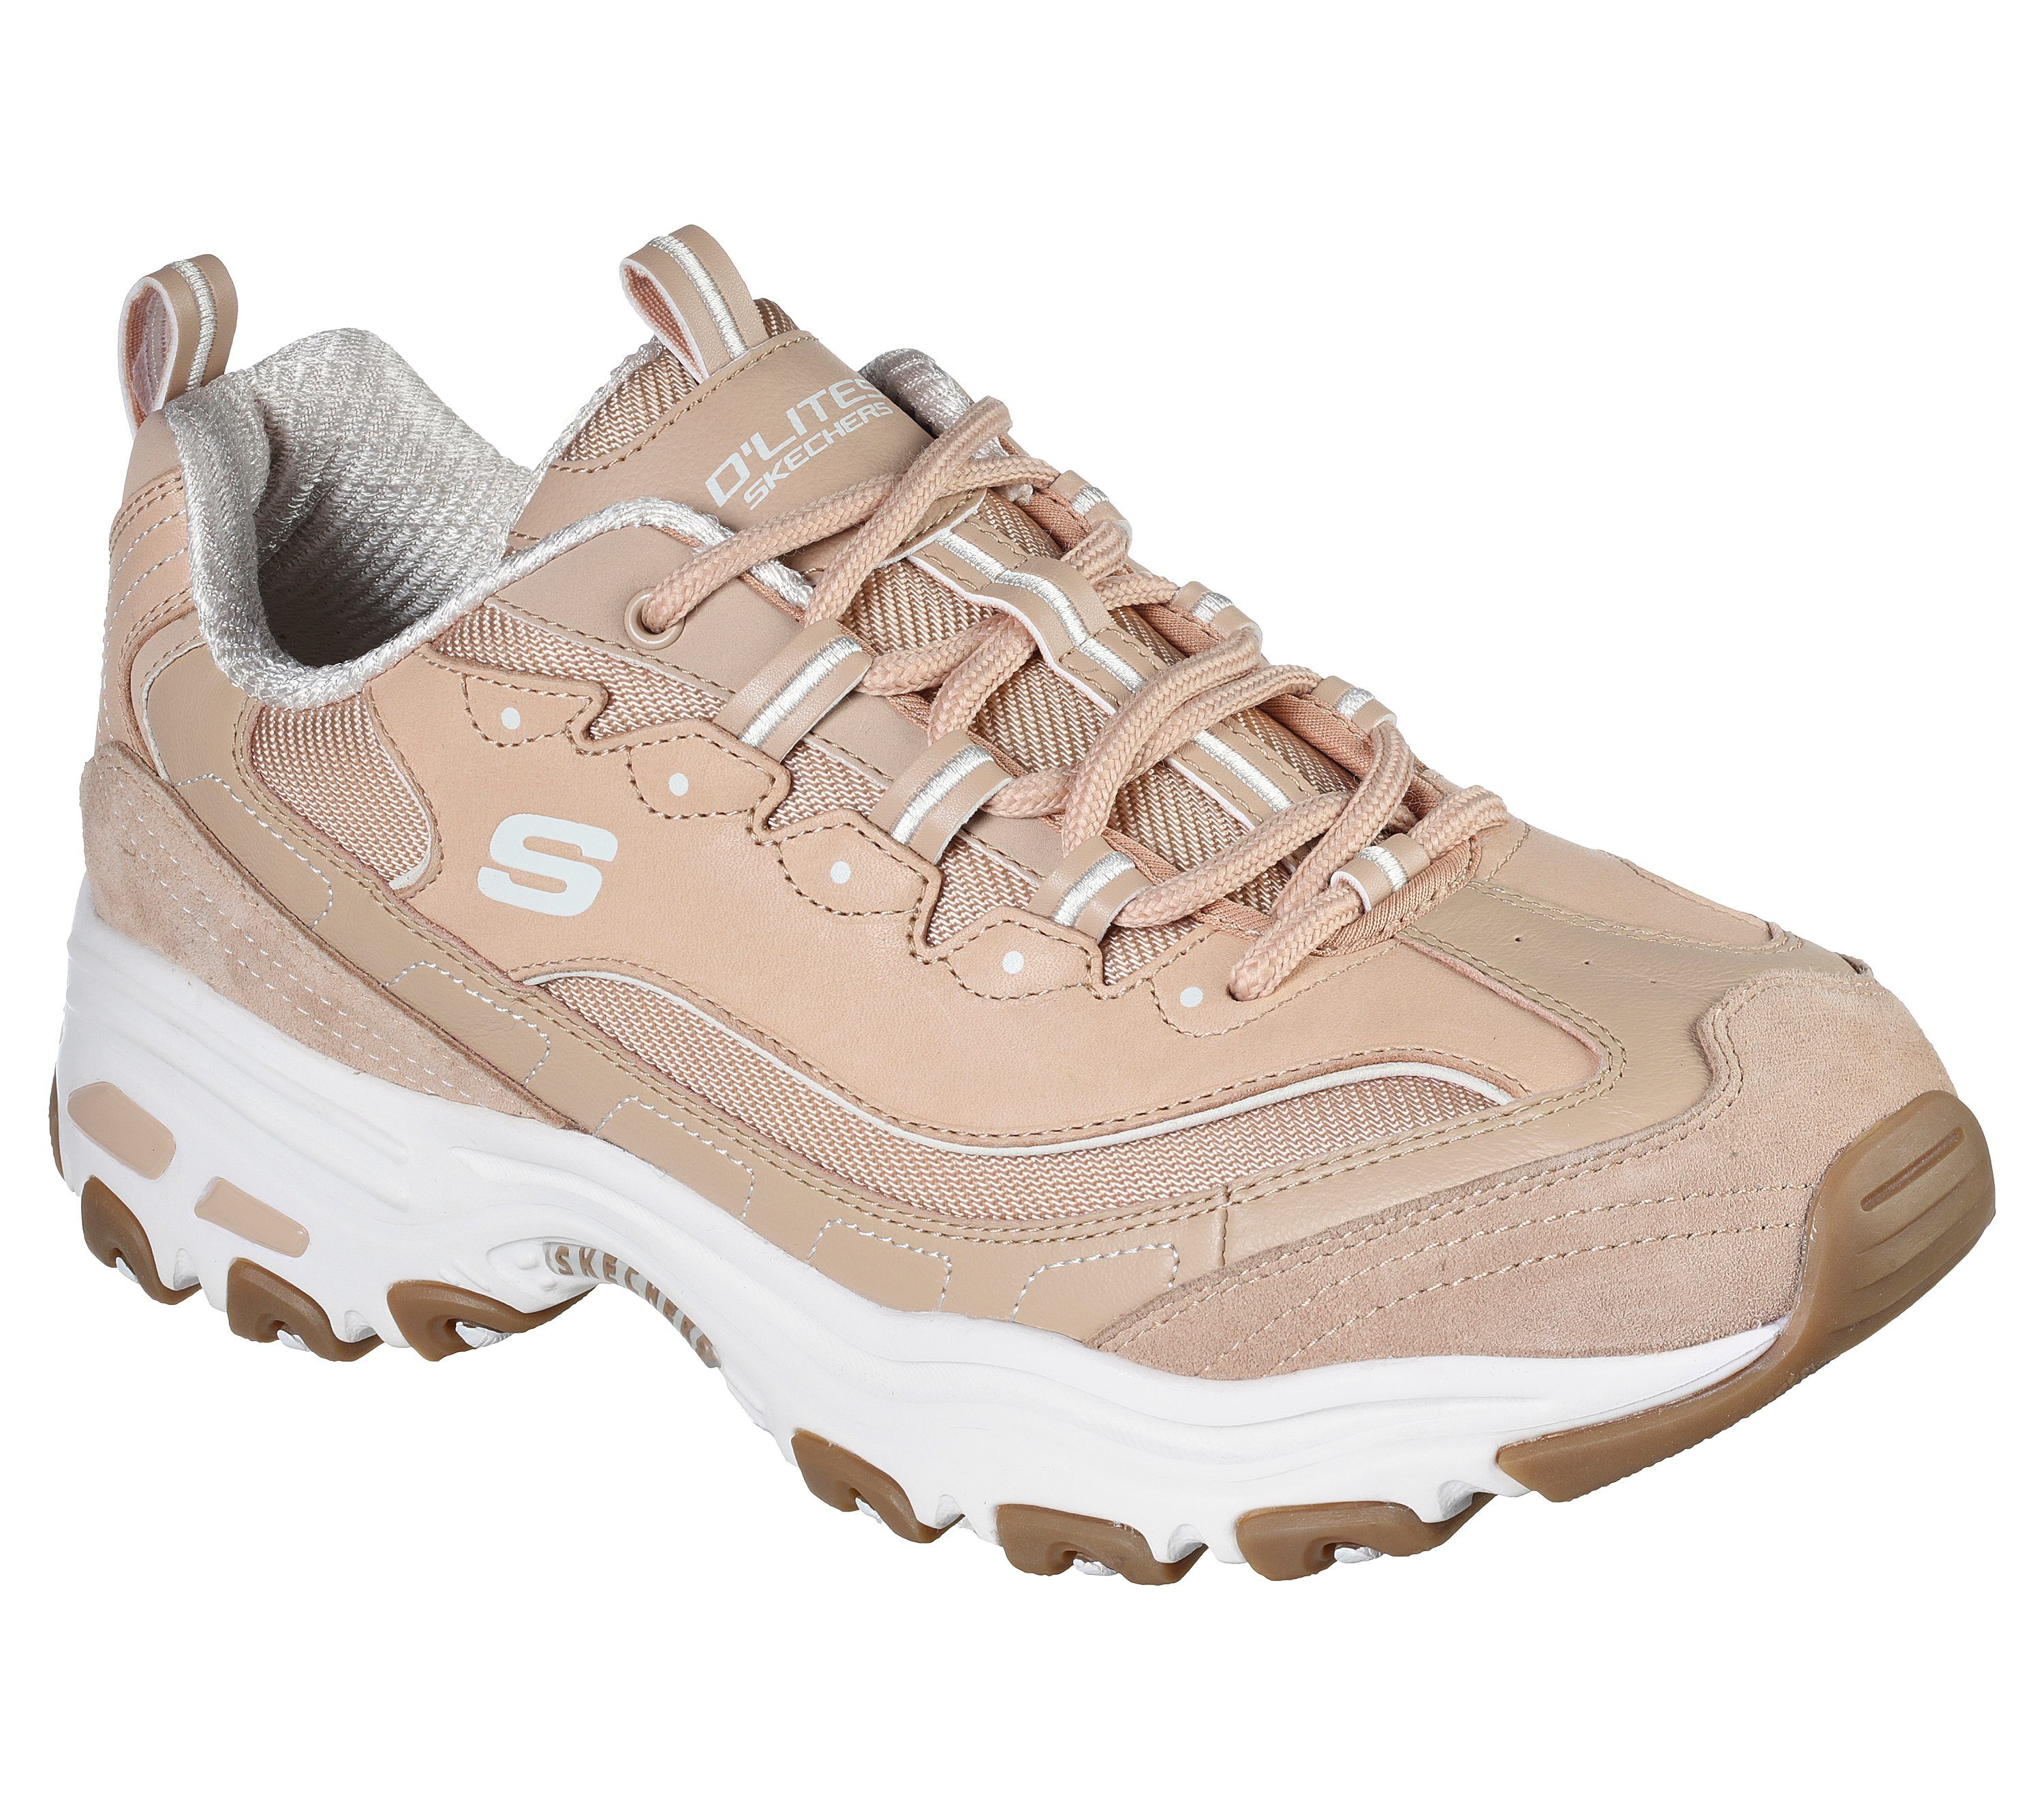 skechers mens shoes new arrival